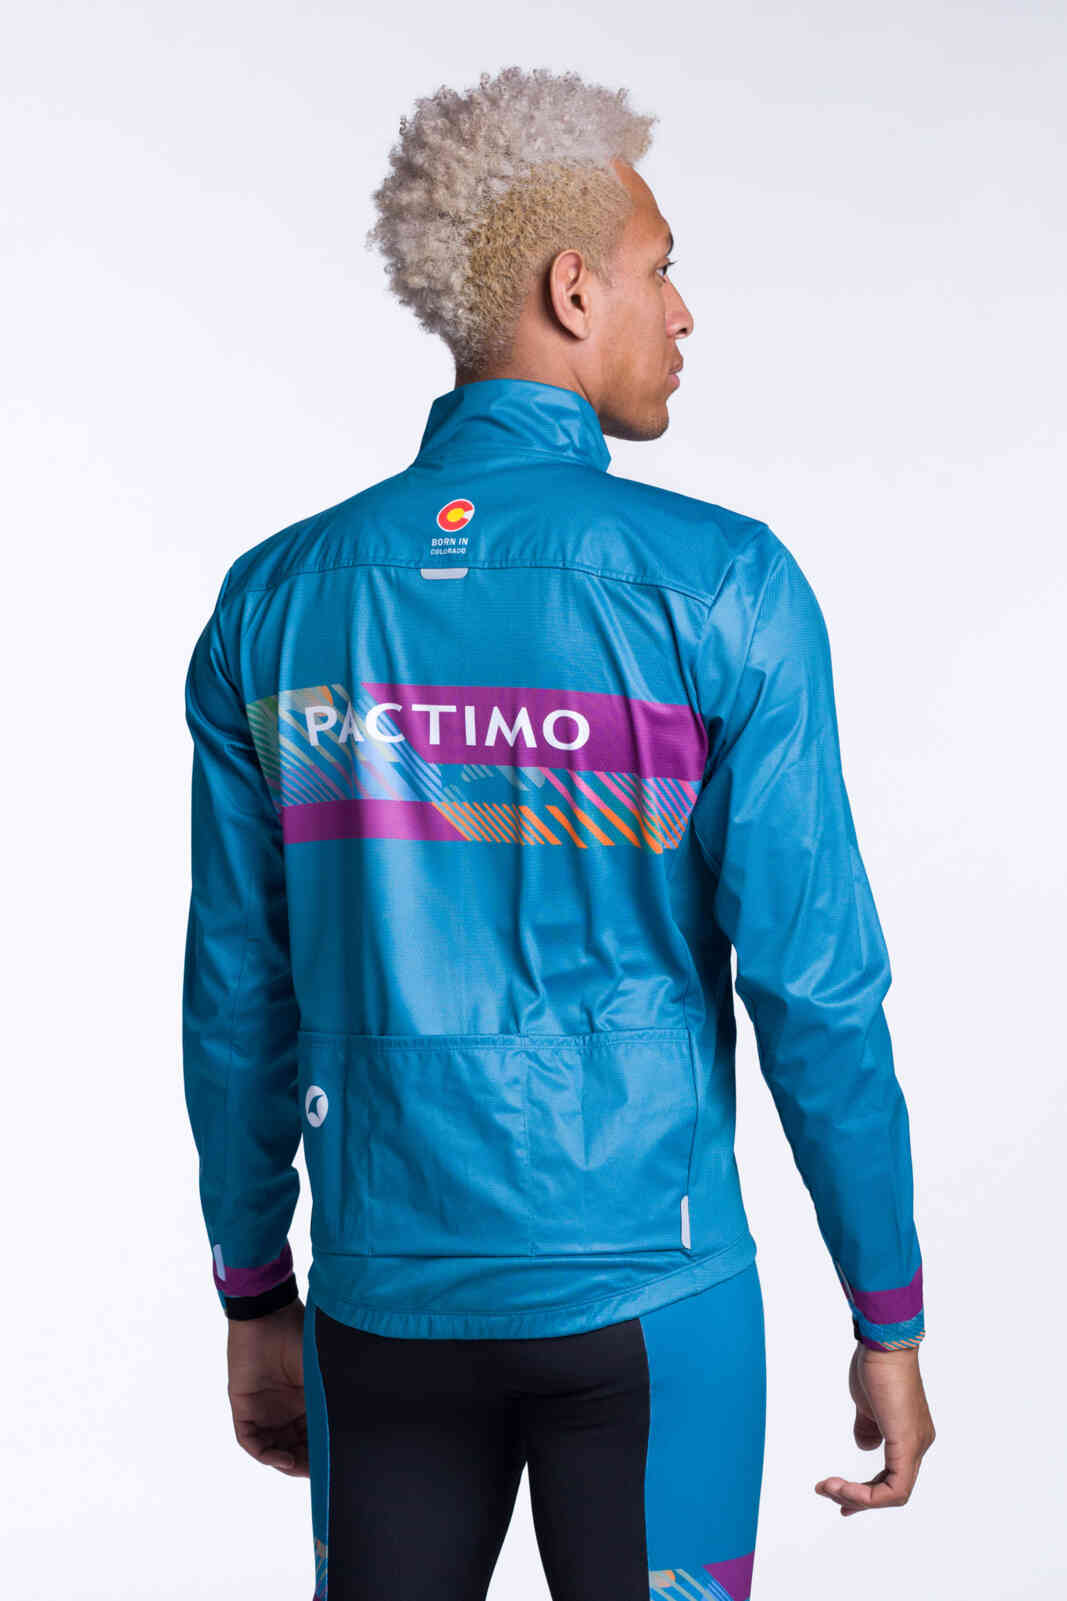 Men's Custom Cycling Jacket for Cold Weather - Breckenridge Back View